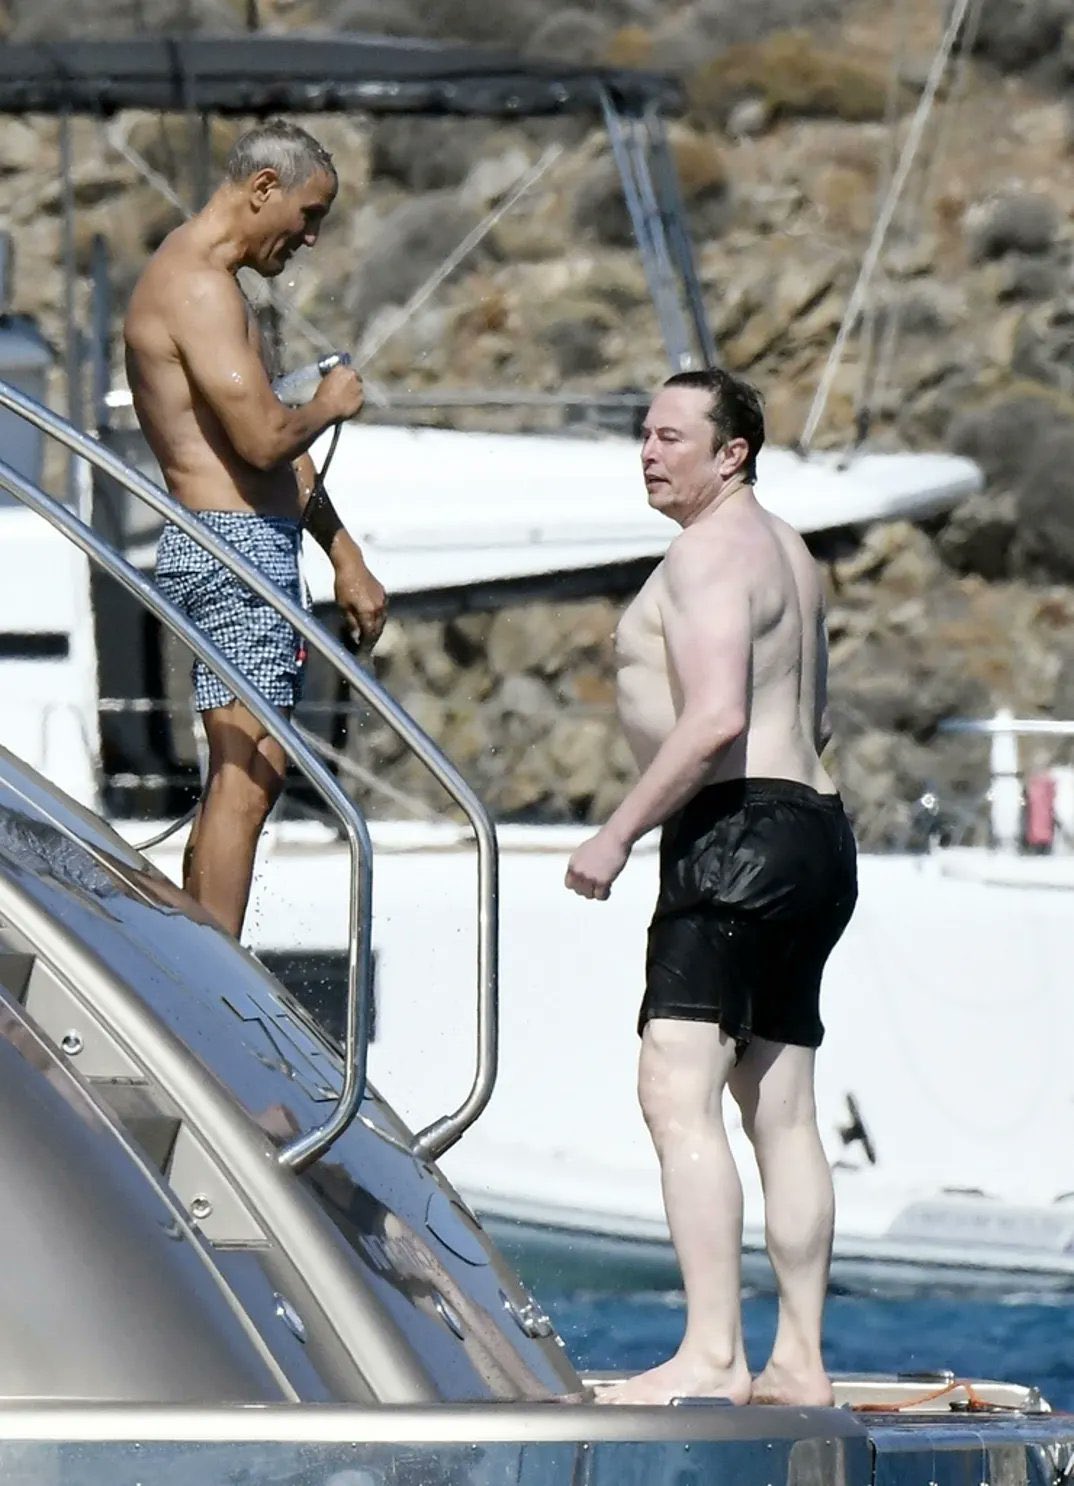 Elon musk shirtless pic from greece gone viral 